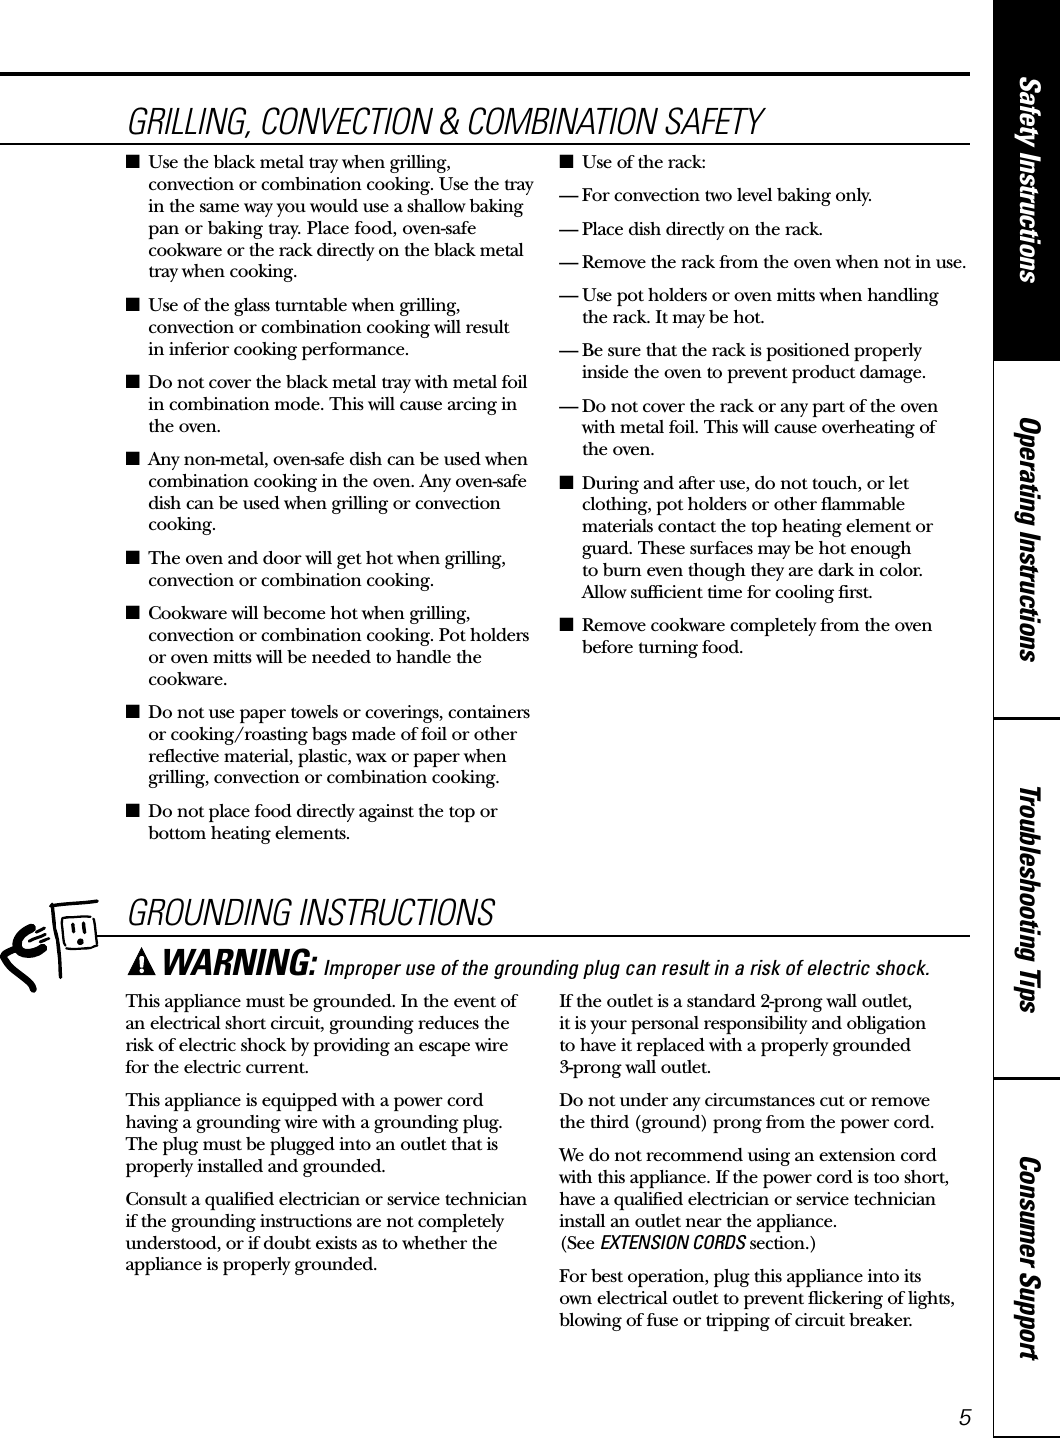 Consumer SupportTroubleshooting TipsOperating InstructionsSafety Instructions5GROUNDING INSTRUCTIONSThis appliance must be grounded. In the event ofan electrical short circuit, grounding reduces therisk of electric shock by providing an escape wire for the electric current. This appliance is equipped with a power cordhaving a grounding wire with a grounding plug.The plug must be plugged into an outlet that isproperly installed and grounded.Consult a qualified electrician or service technicianif the grounding instructions are not completelyunderstood, or if doubt exists as to whether theappliance is properly grounded.If the outlet is a standard 2-prong wall outlet, it is your personal responsibility and obligation to have it replaced with a properly grounded 3-prong wall outlet.Do not under any circumstances cut or remove the third (ground) prong from the power cord.We do not recommend using an extension cordwith this appliance. If the power cord is too short,have a qualified electrician or service technicianinstall an outlet near the appliance. (See EXTENSION CORDS section.)For best operation, plug this appliance into its own electrical outlet to prevent flickering of lights,blowing of fuse or tripping of circuit breaker.WARNING: Improper use of the grounding plug can result in a risk of electric shock.www.GEAppliances.caGRILLING, CONVECTION &amp; COMBINATION SAFETY■Use the black metal tray when grilling,convection or combination cooking. Use the trayin the same way you would use a shallow bakingpan or baking tray. Place food, oven-safecookware or the rack directly on the black metaltray when cooking.■Use of the glass turntable when grilling,convection or combination cooking will result in inferior cooking performance.■Do not cover the black metal tray with metal foilin combination mode. This will cause arcing inthe oven.■Any non-metal, oven-safe dish can be used whencombination cooking in the oven. Any oven-safedish can be used when grilling or convectioncooking.■The oven and door will get hot when grilling,convection or combination cooking.■Cookware will become hot when grilling,convection or combination cooking. Pot holdersor oven mitts will be needed to handle thecookware.■Do not use paper towels or coverings, containersor cooking/roasting bags made of foil or otherreflective material, plastic, wax or paper whengrilling, convection or combination cooking.■Do not place food directly against the top orbottom heating elements.■Use of the rack:— For convection two level baking only.— Place dish directly on the rack.— Remove the rack from the oven when not in use.— Use pot holders or oven mitts when handling the rack. It may be hot.— Be sure that the rack is positioned properly inside the oven to prevent product damage.— Do not cover the rack or any part of the ovenwith metal foil. This will cause overheating of the oven.■During and after use, do not touch, or letclothing, pot holders or other flammablematerials contact the top heating element orguard. These surfaces may be hot enough to burn even though they are dark in color. Allow sufficient time for cooling first.■Remove cookware completely from the ovenbefore turning food.